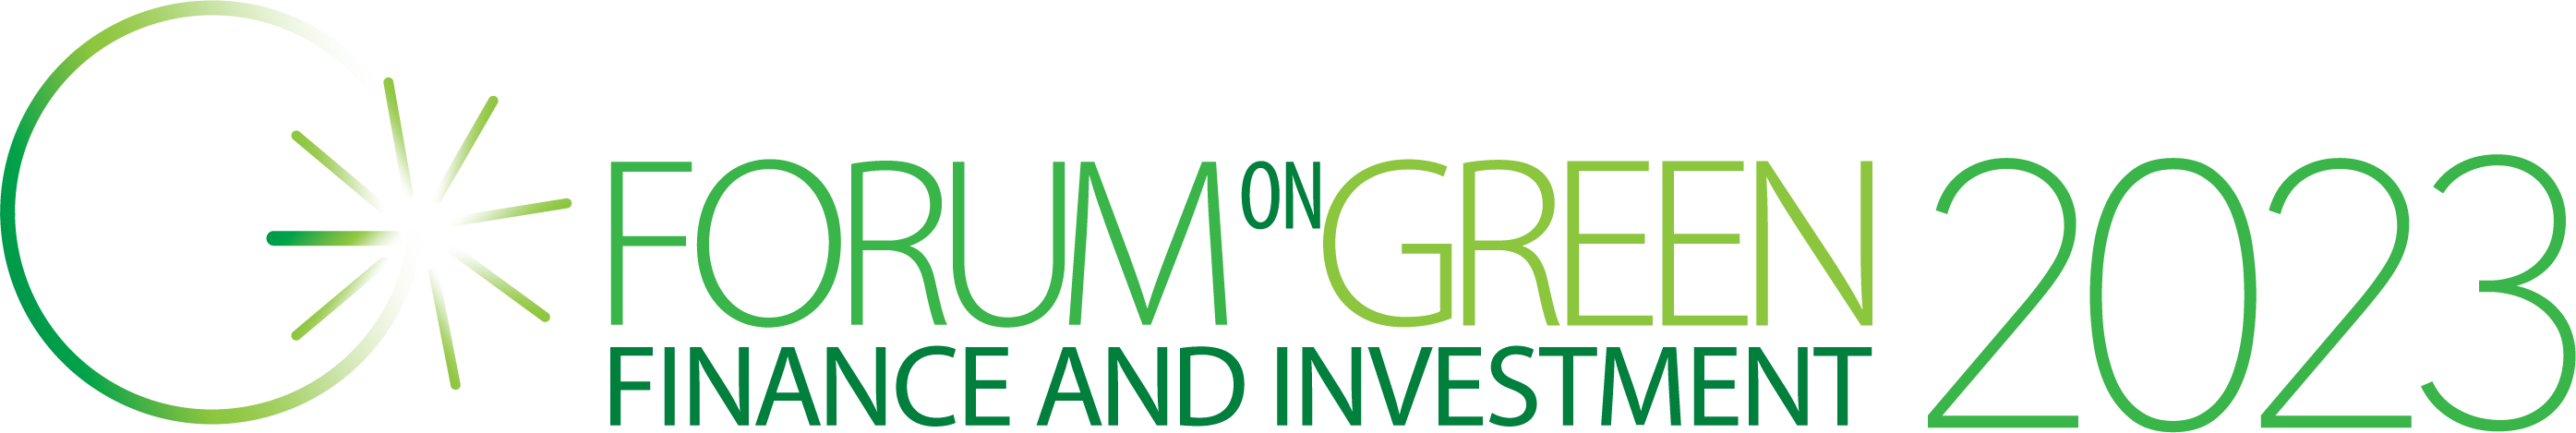 10th OECD Forum on Green Finance and Investment